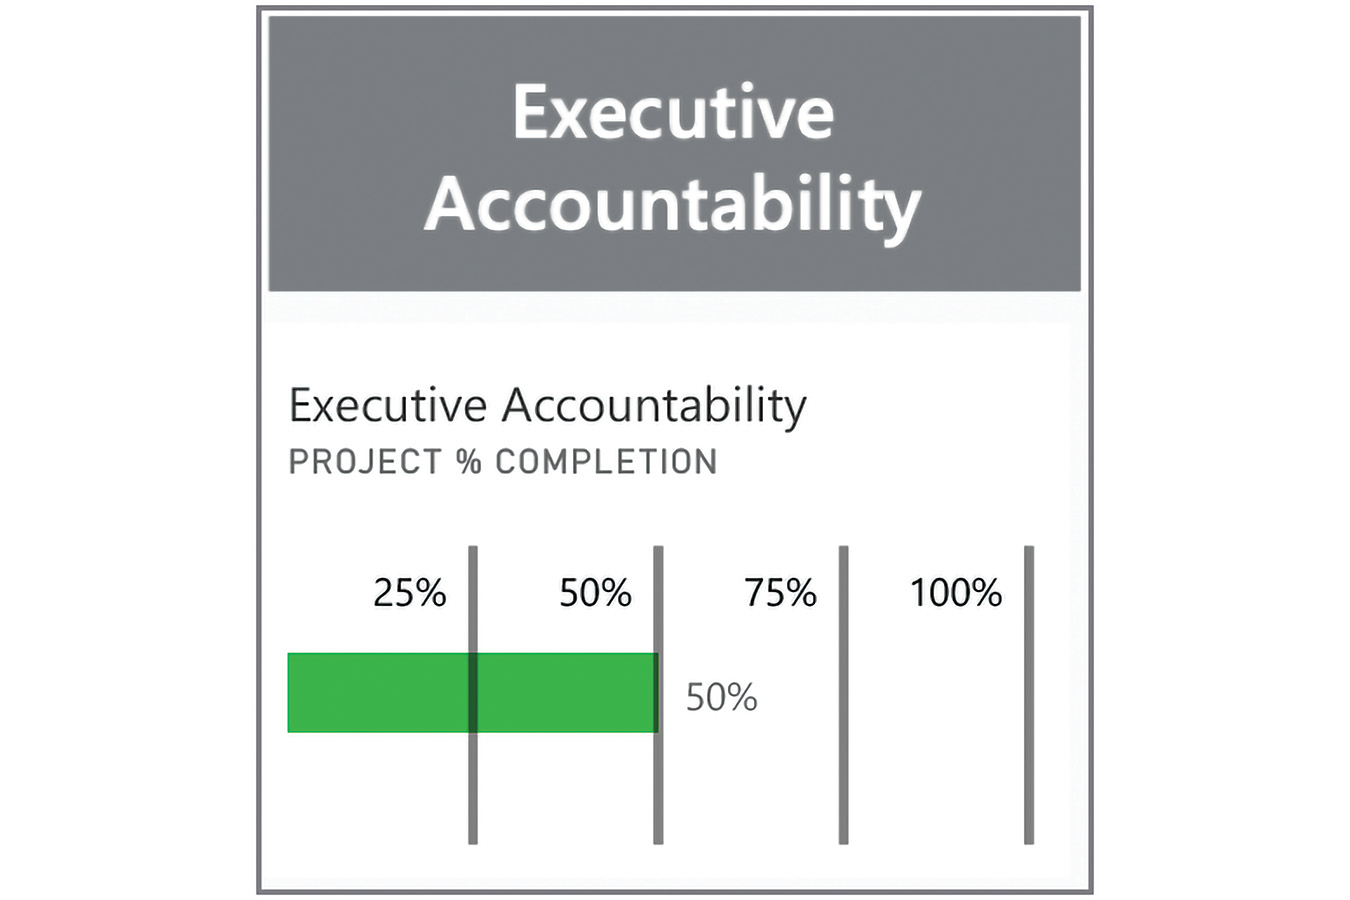 Executive accountability sits at 50% of project completion